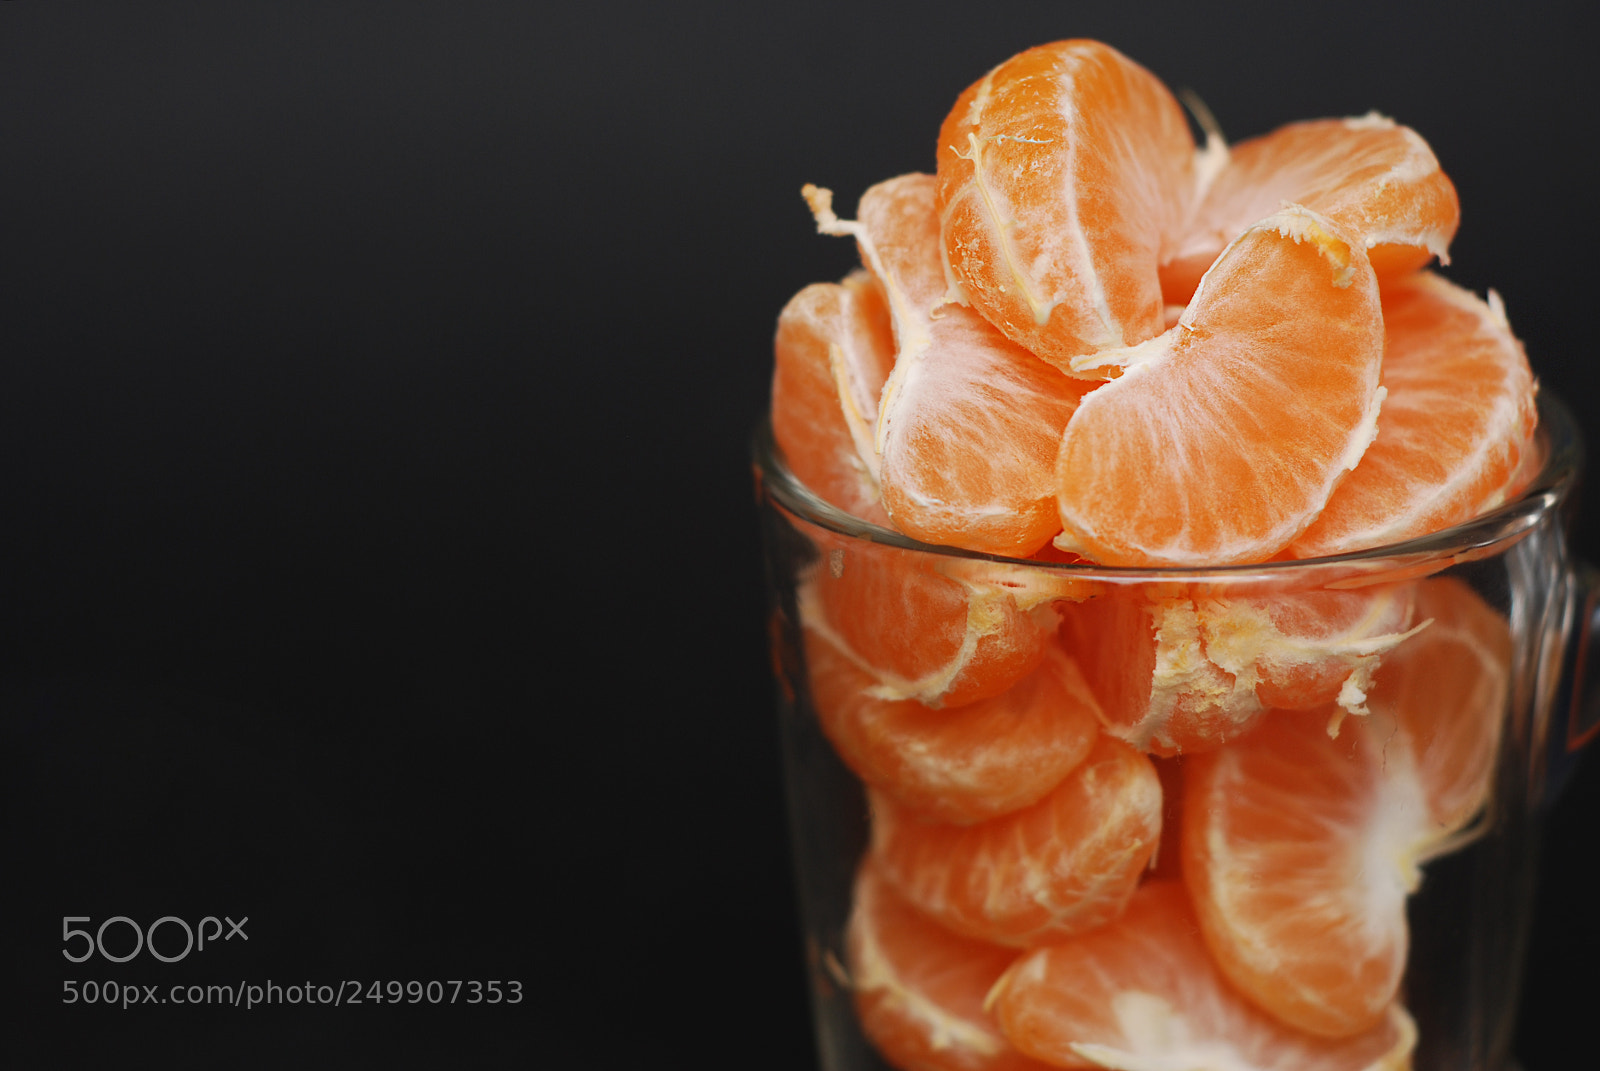 Nikon D80 sample photo. Tangerines slices in glass photography